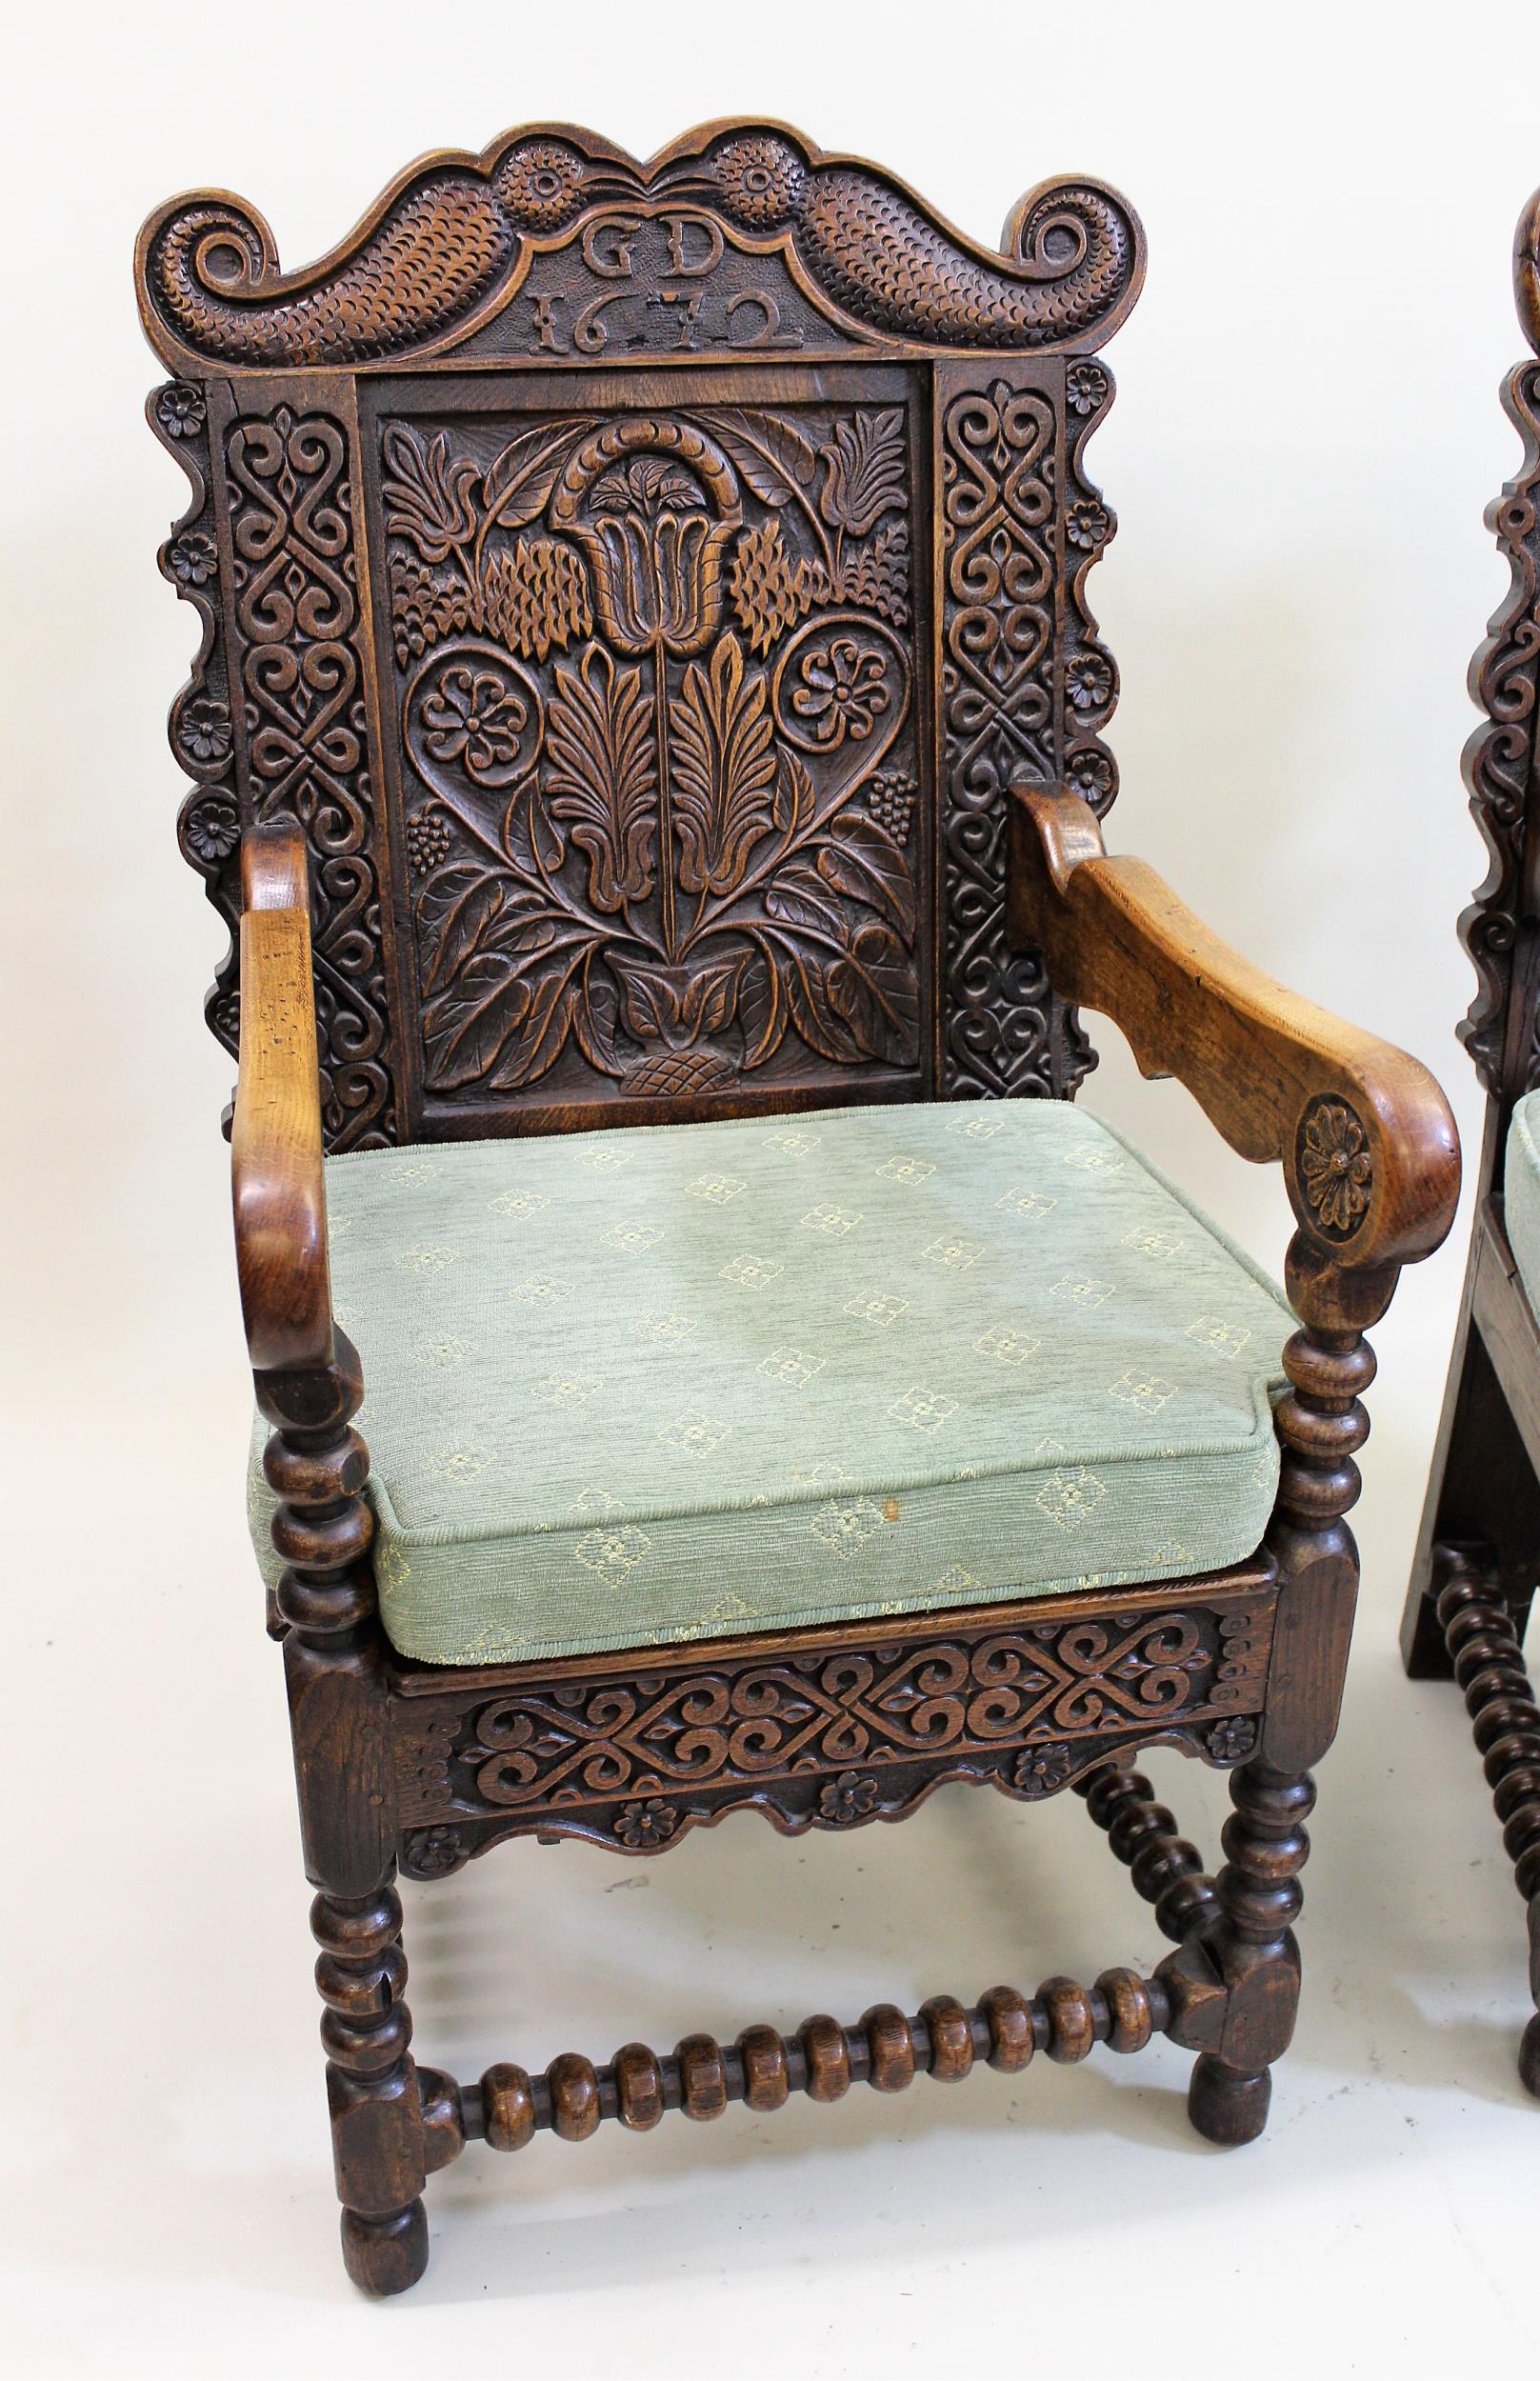 Near pair of carved oak Wainscott chairs in 17th Century style, the floral decorated backs above - Image 2 of 3